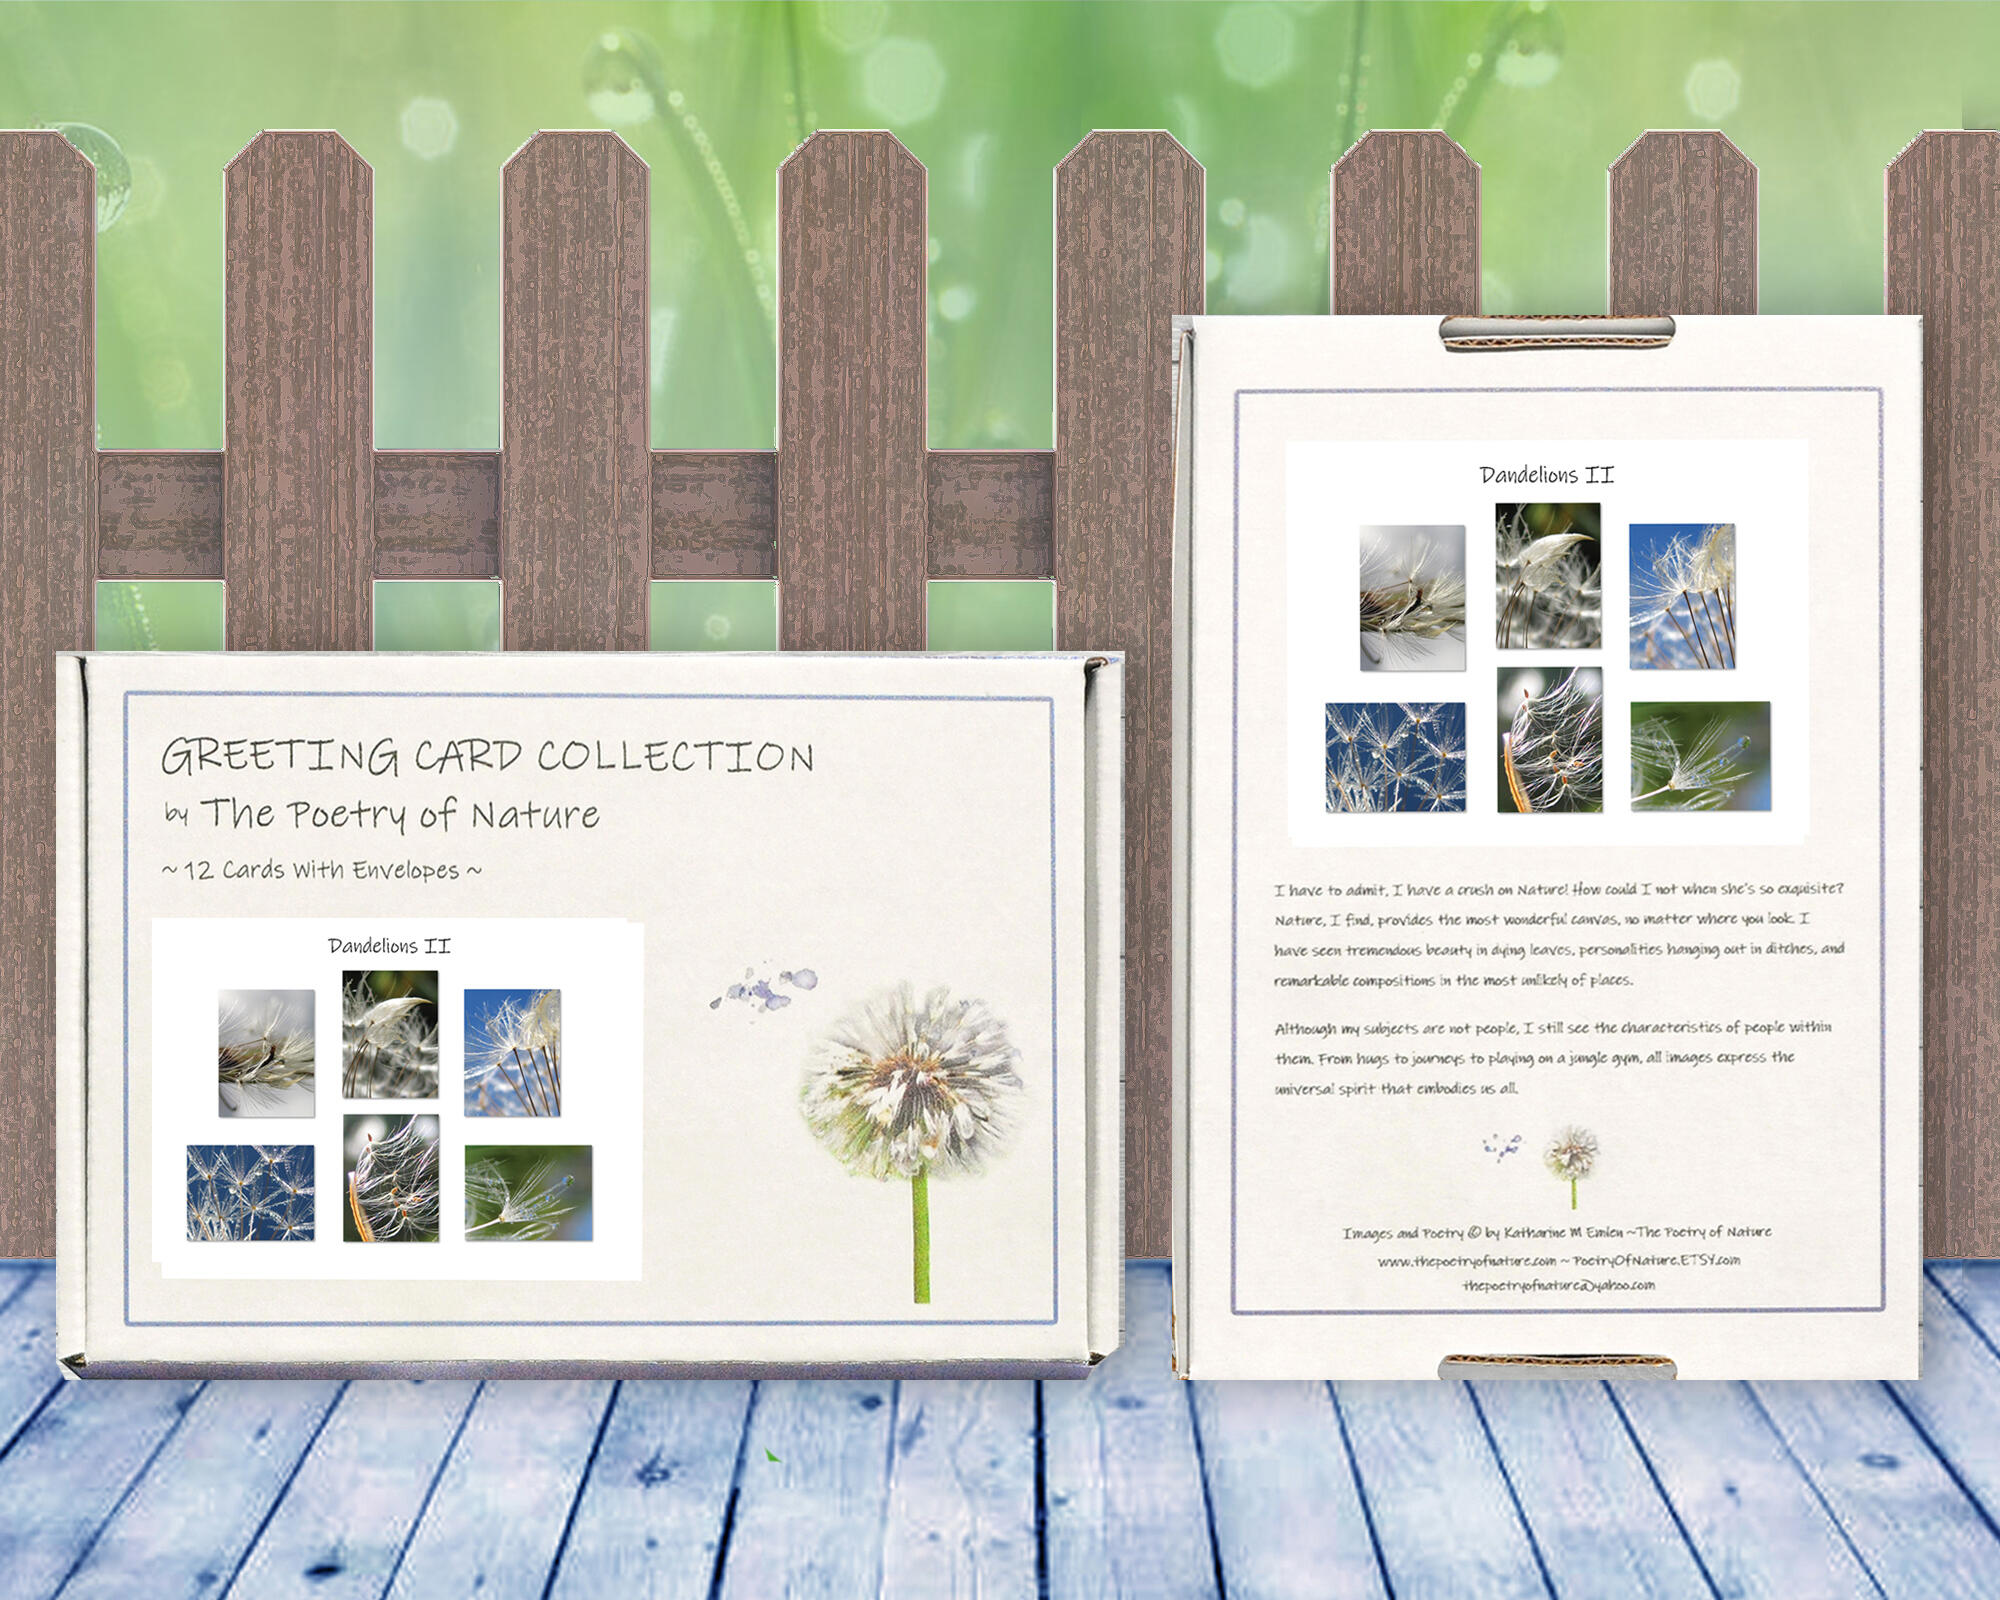 Dandelions II - Greeting Card Collection by The Poetry of Nature